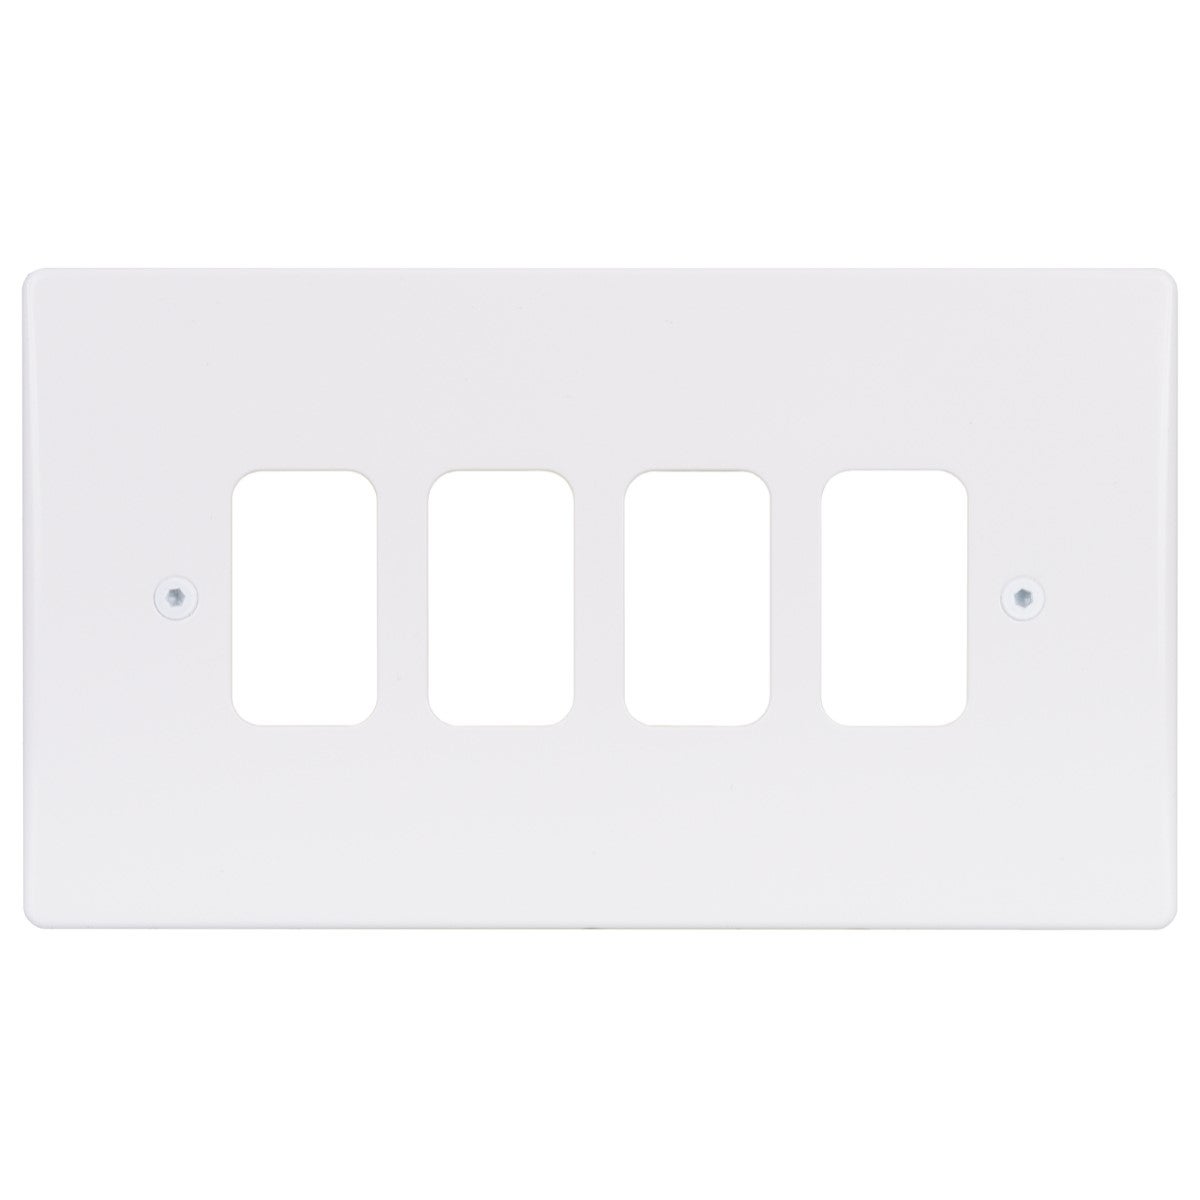 Ultimate - moulded plate Grid system 4 gangs - white